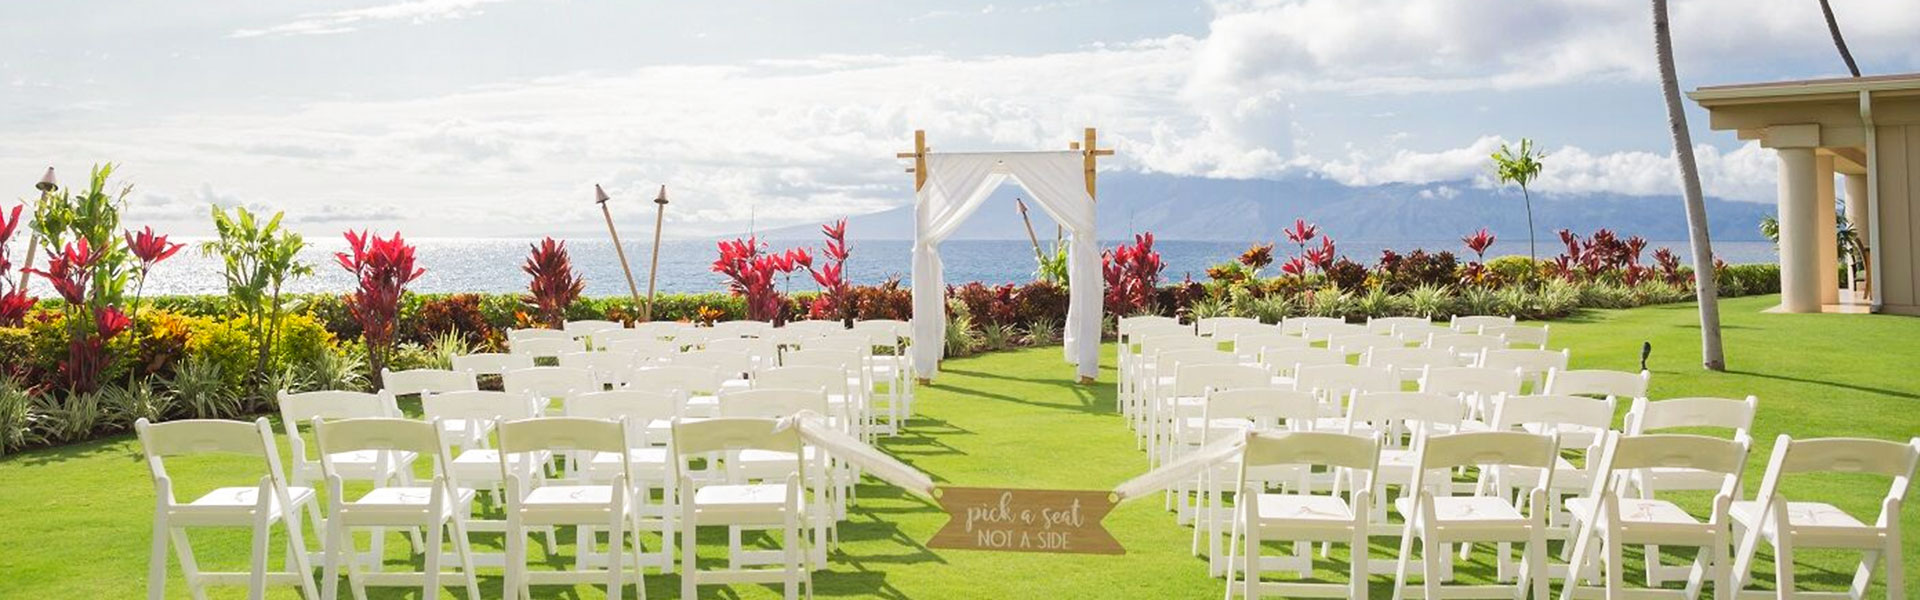 chairs set for a wedding ceremony